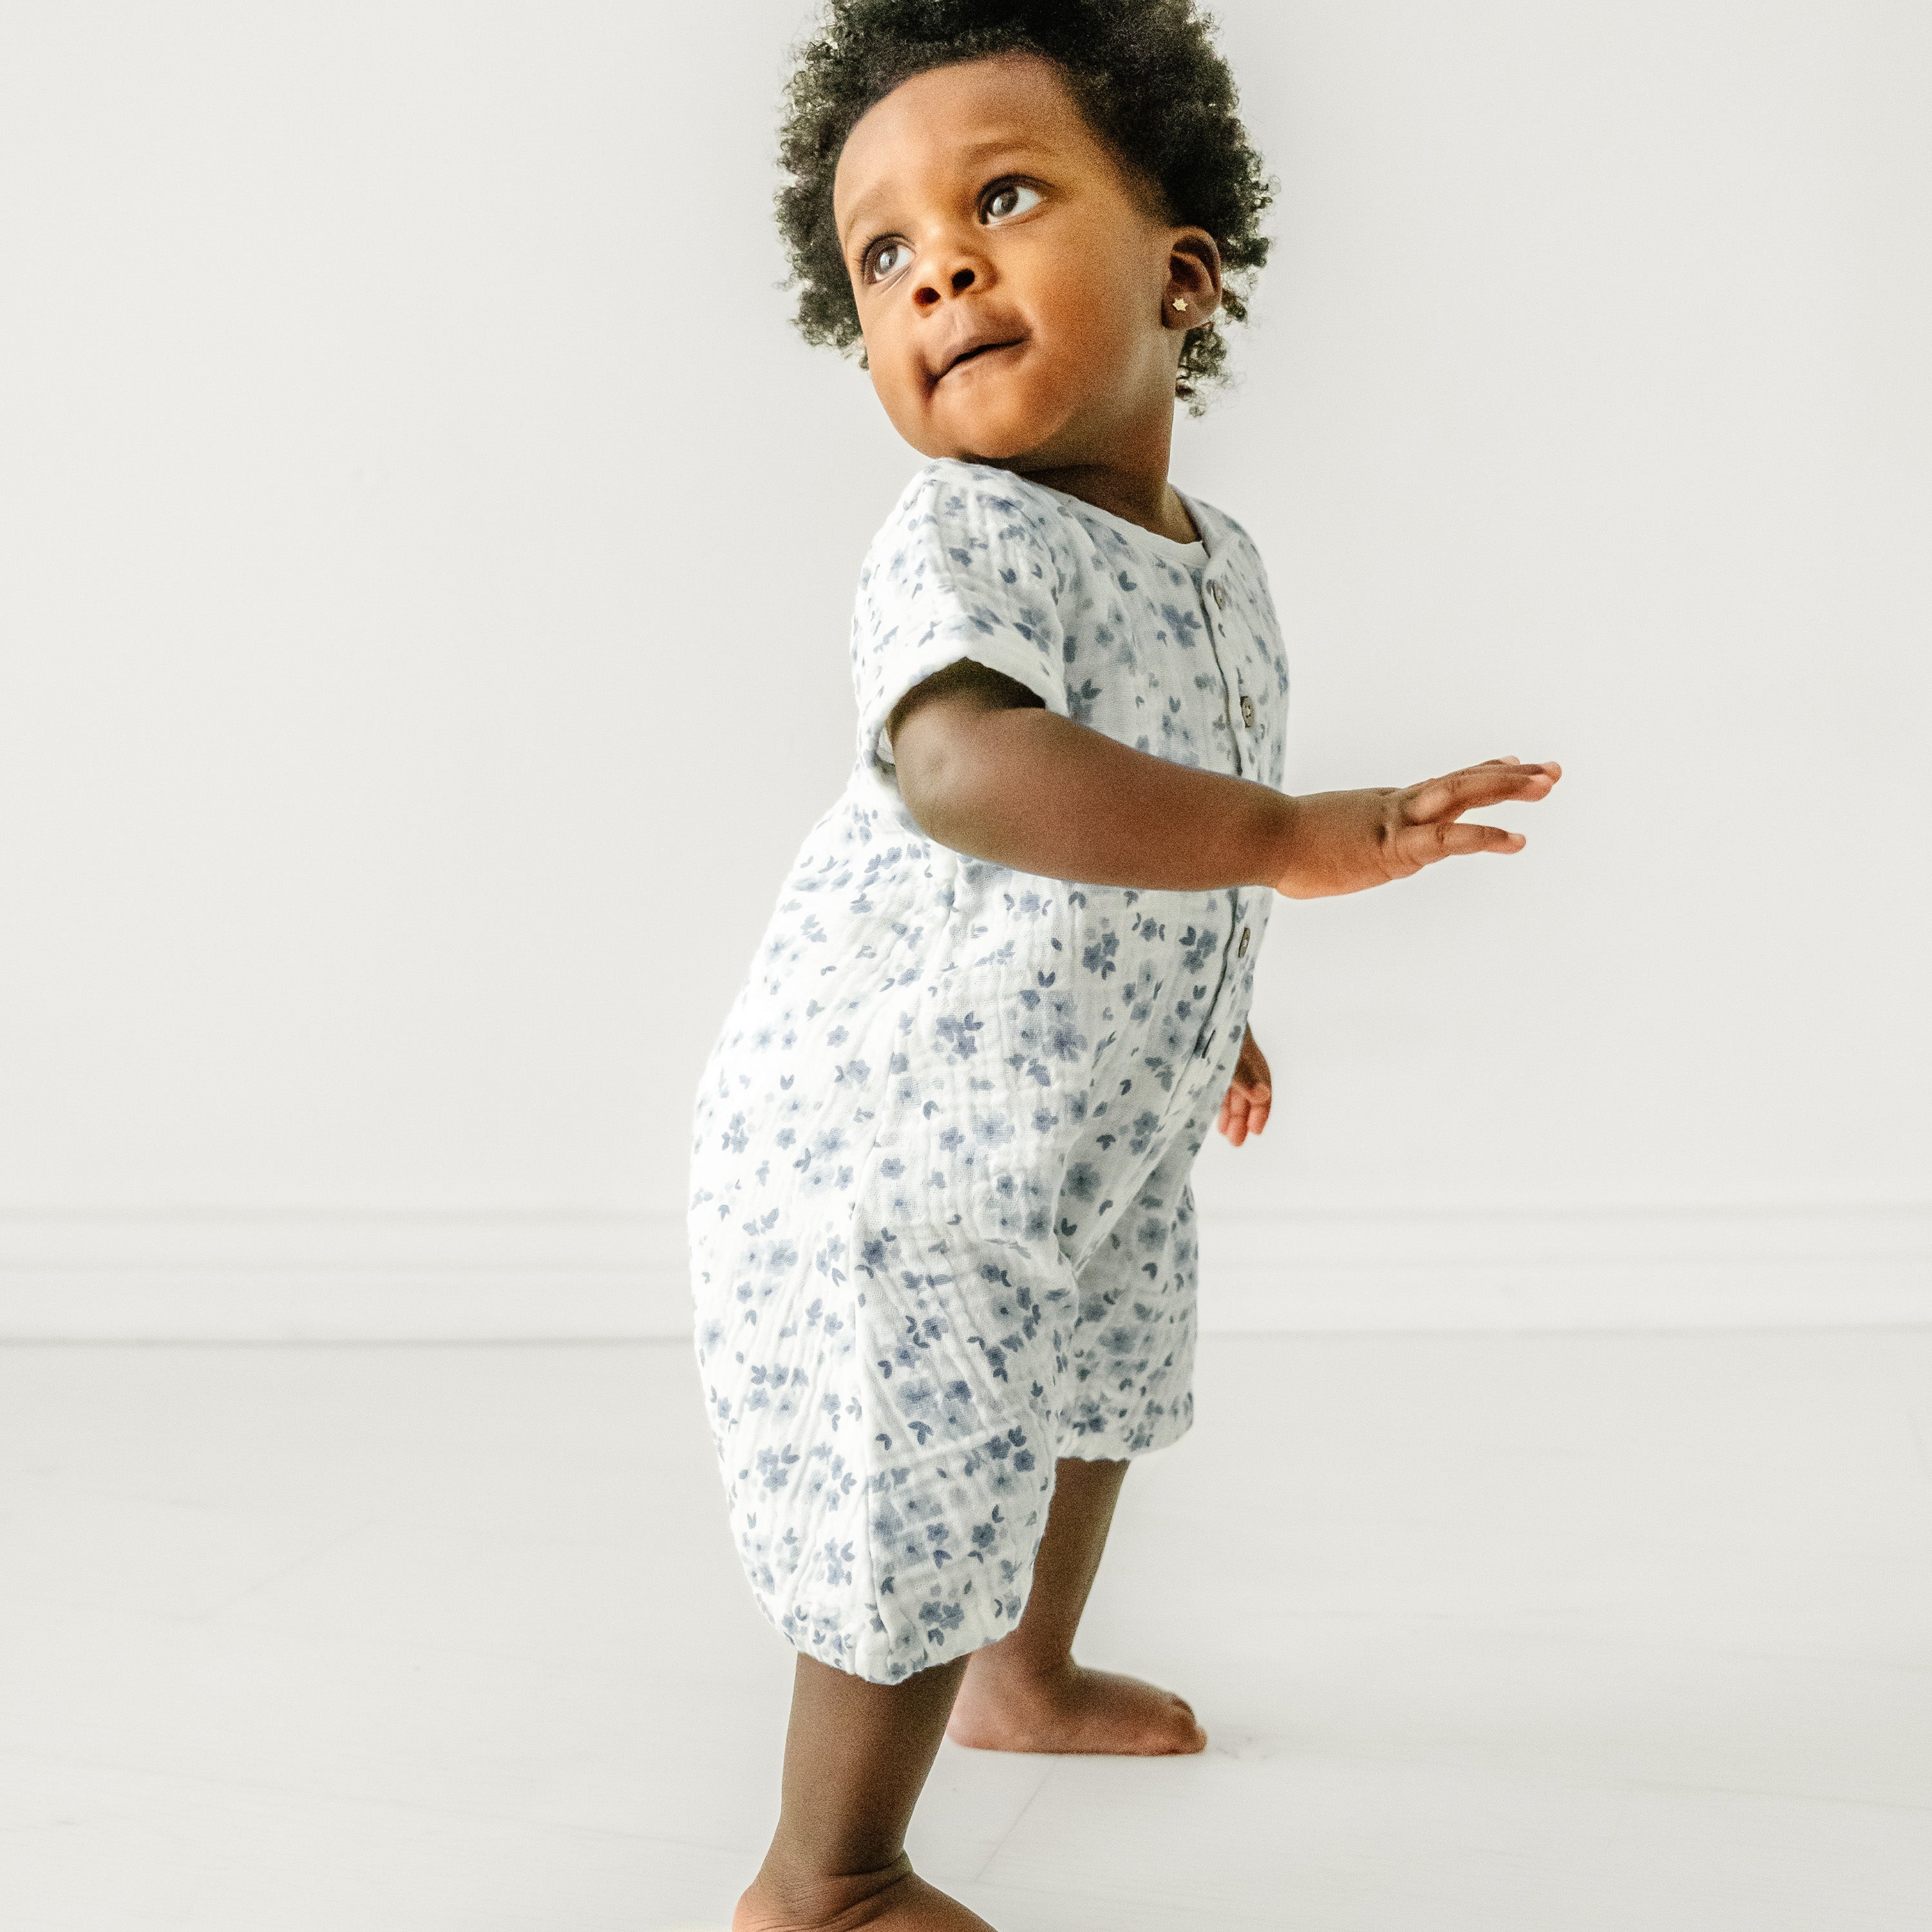 A young toddler girl taking tentative steps in a Makemake Organics Organic Muslin Short Bubble Romper in Periwinkle, against a plain white background, looks joyfully to the side while stretching out a hand.